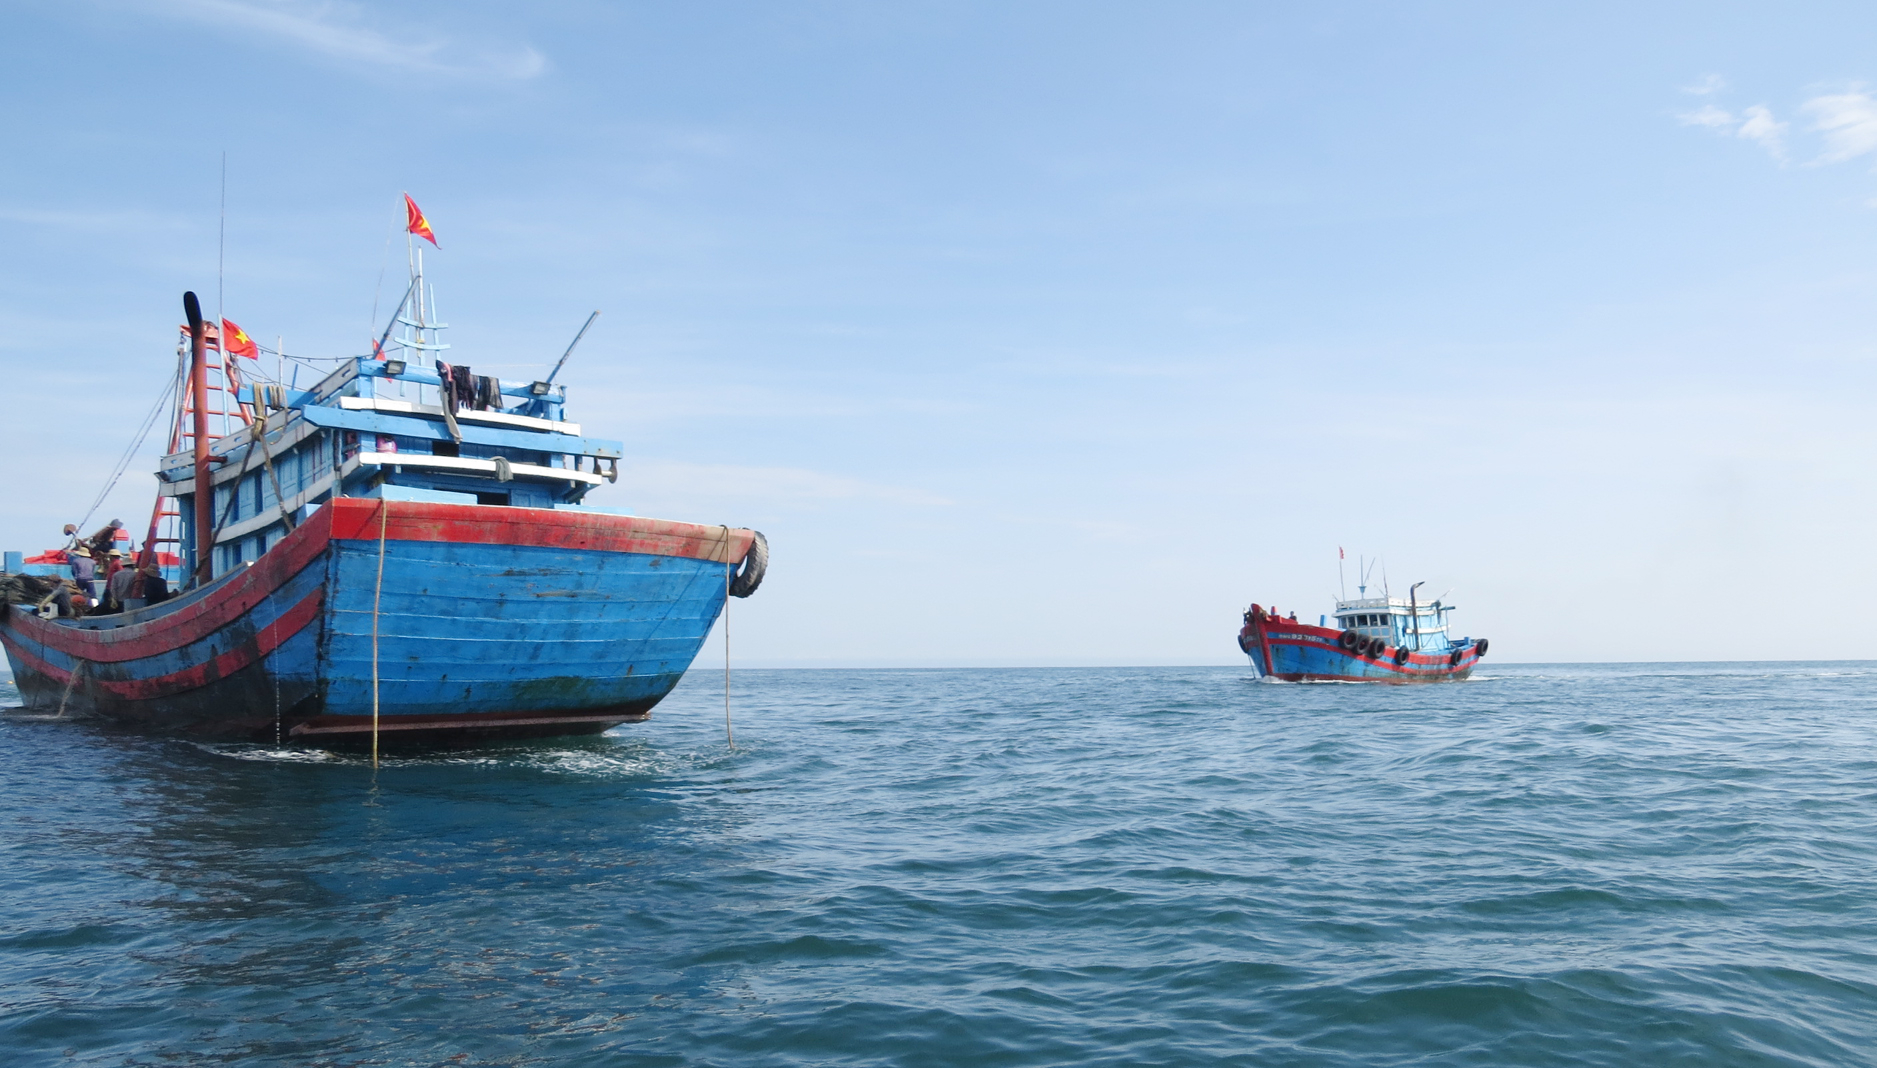 The status of illegal fishing boats operating in Quang Binh waters has been prevented. Photo: T. Phung.